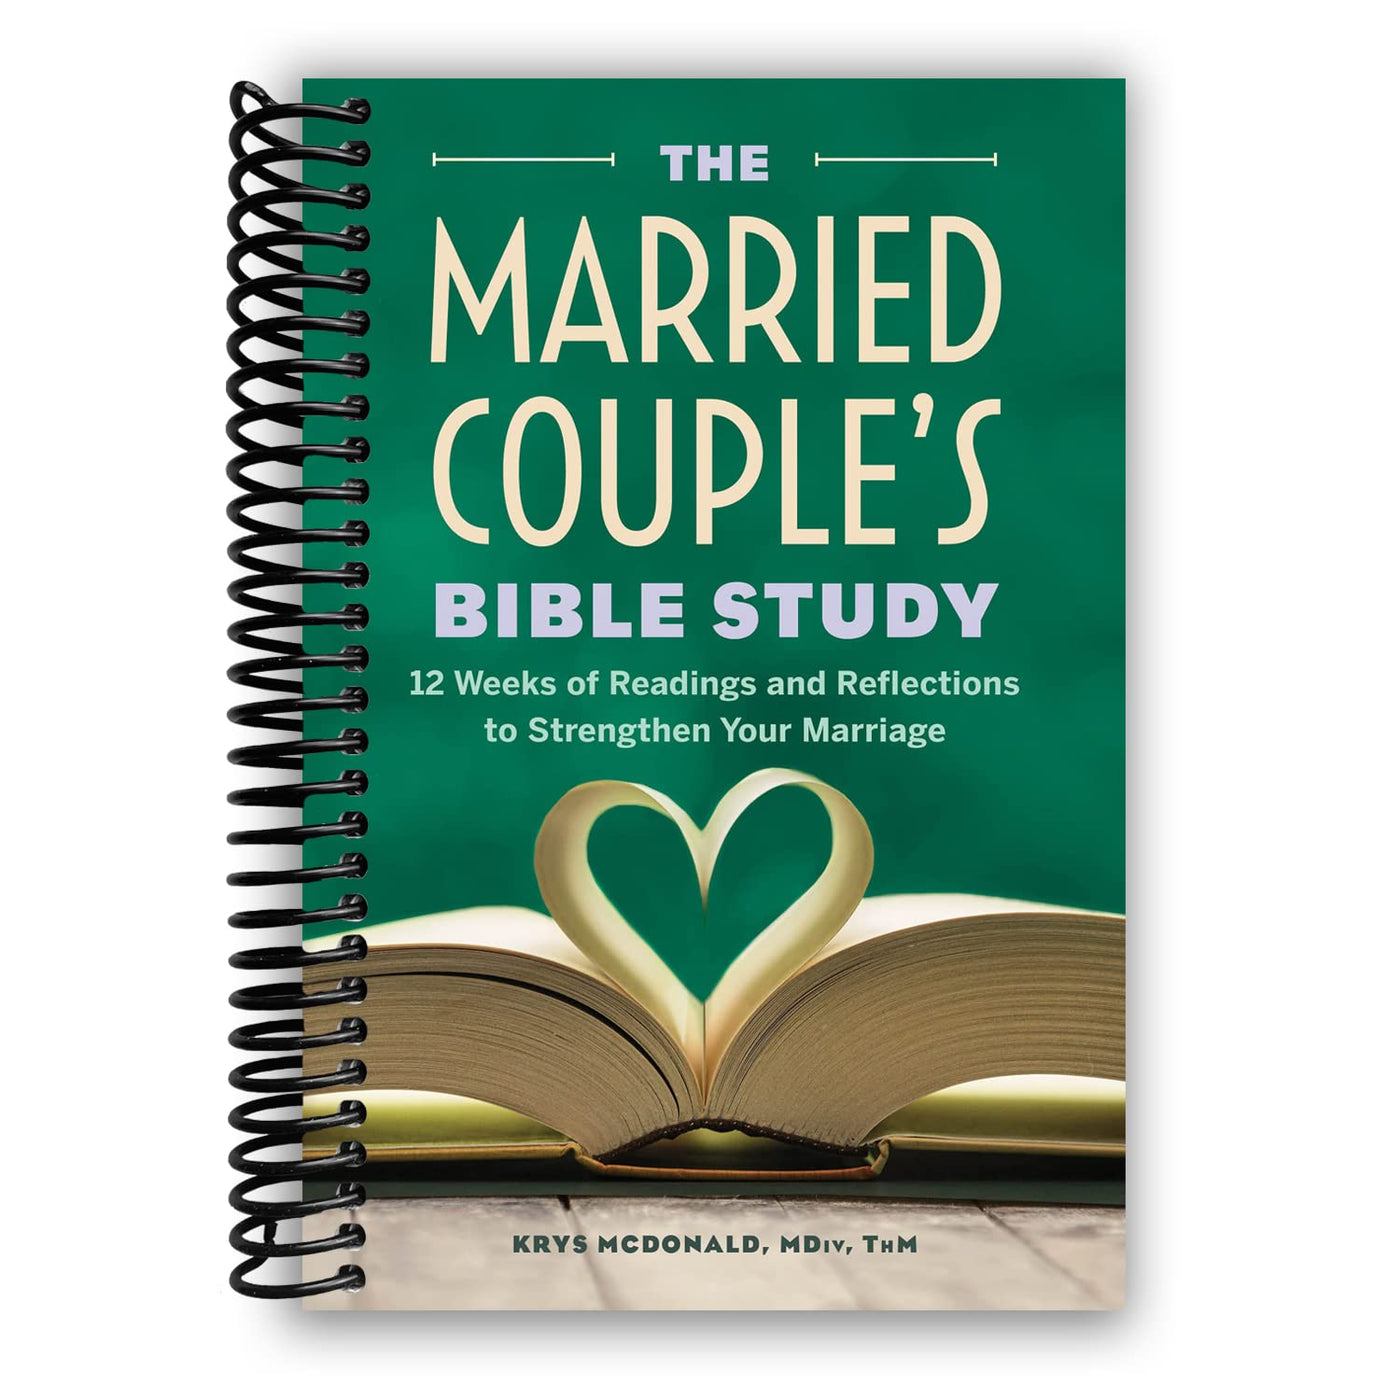 The Married Couple's Bible Study: 12 Weeks of Readings and Reflections to Strengthen Your Marriage (Spiral Bound)